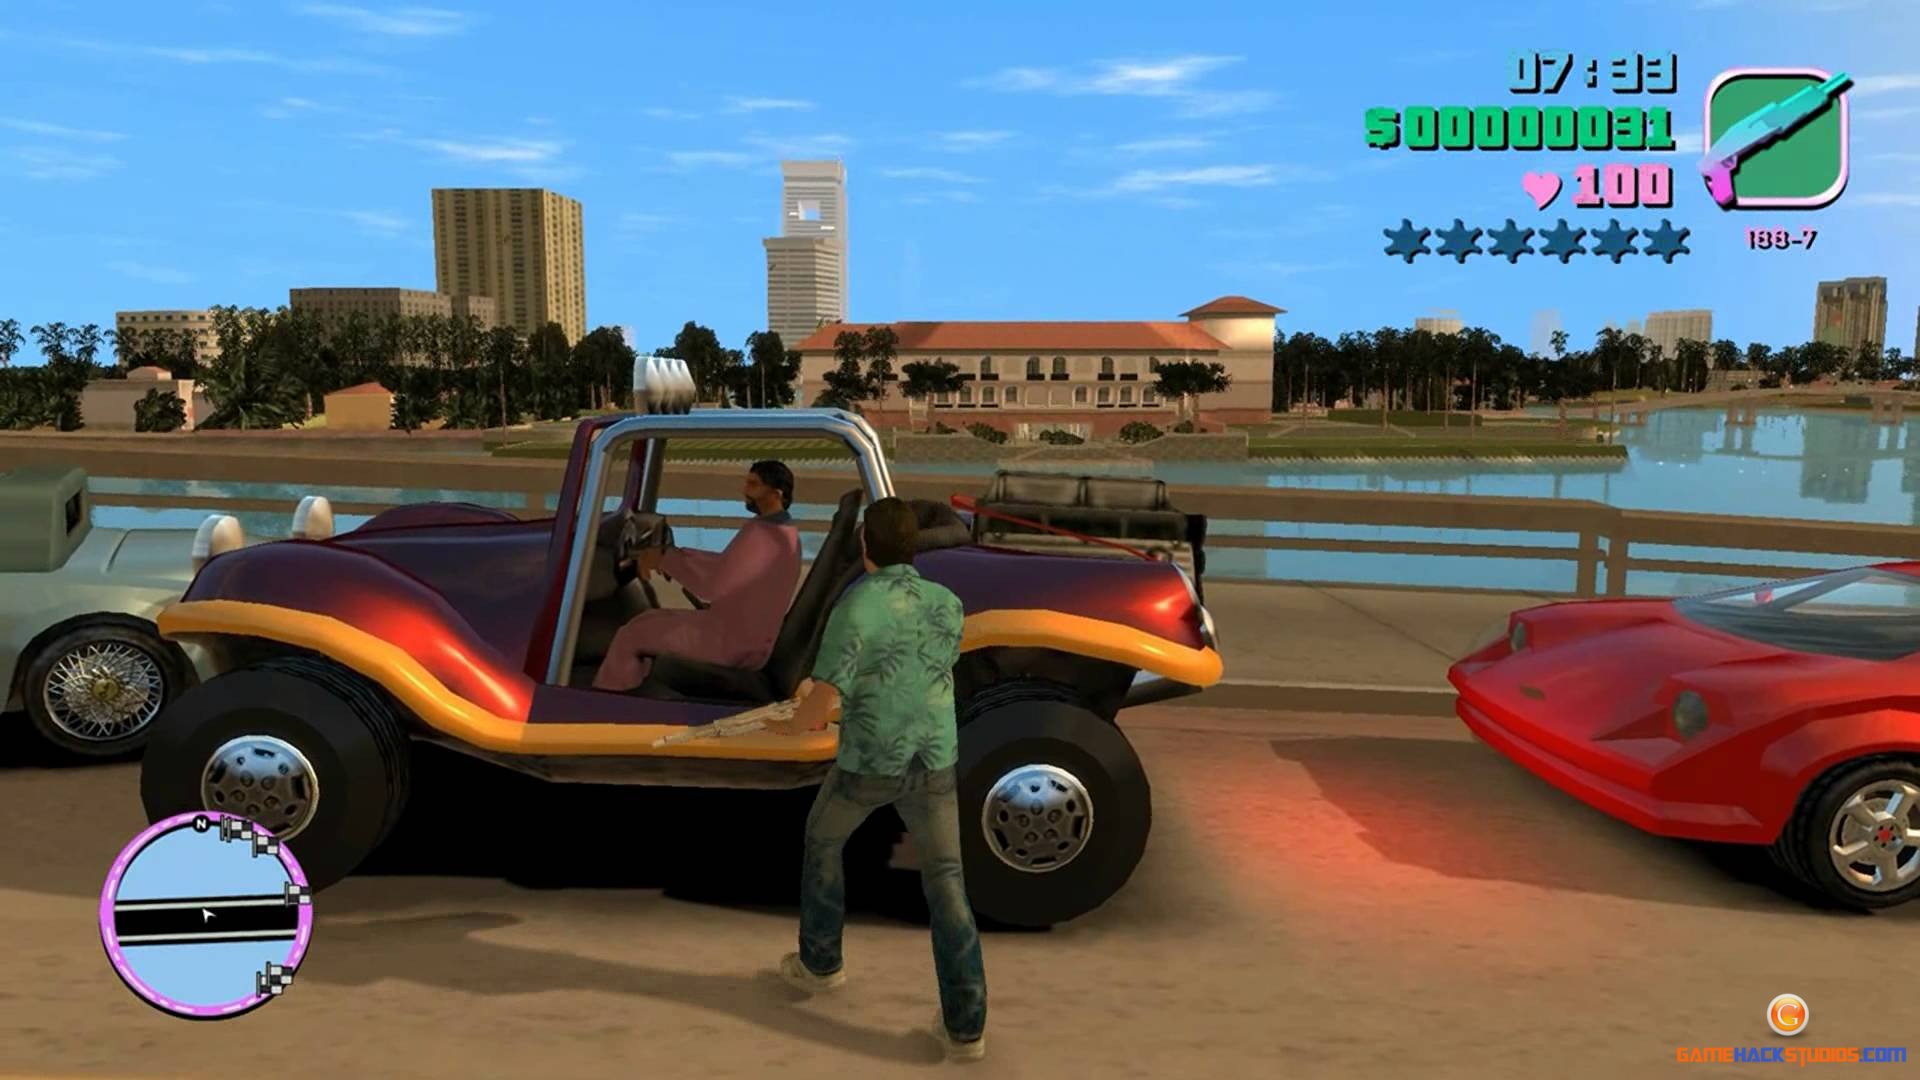 Gta vice city san andreas game free download for android phone